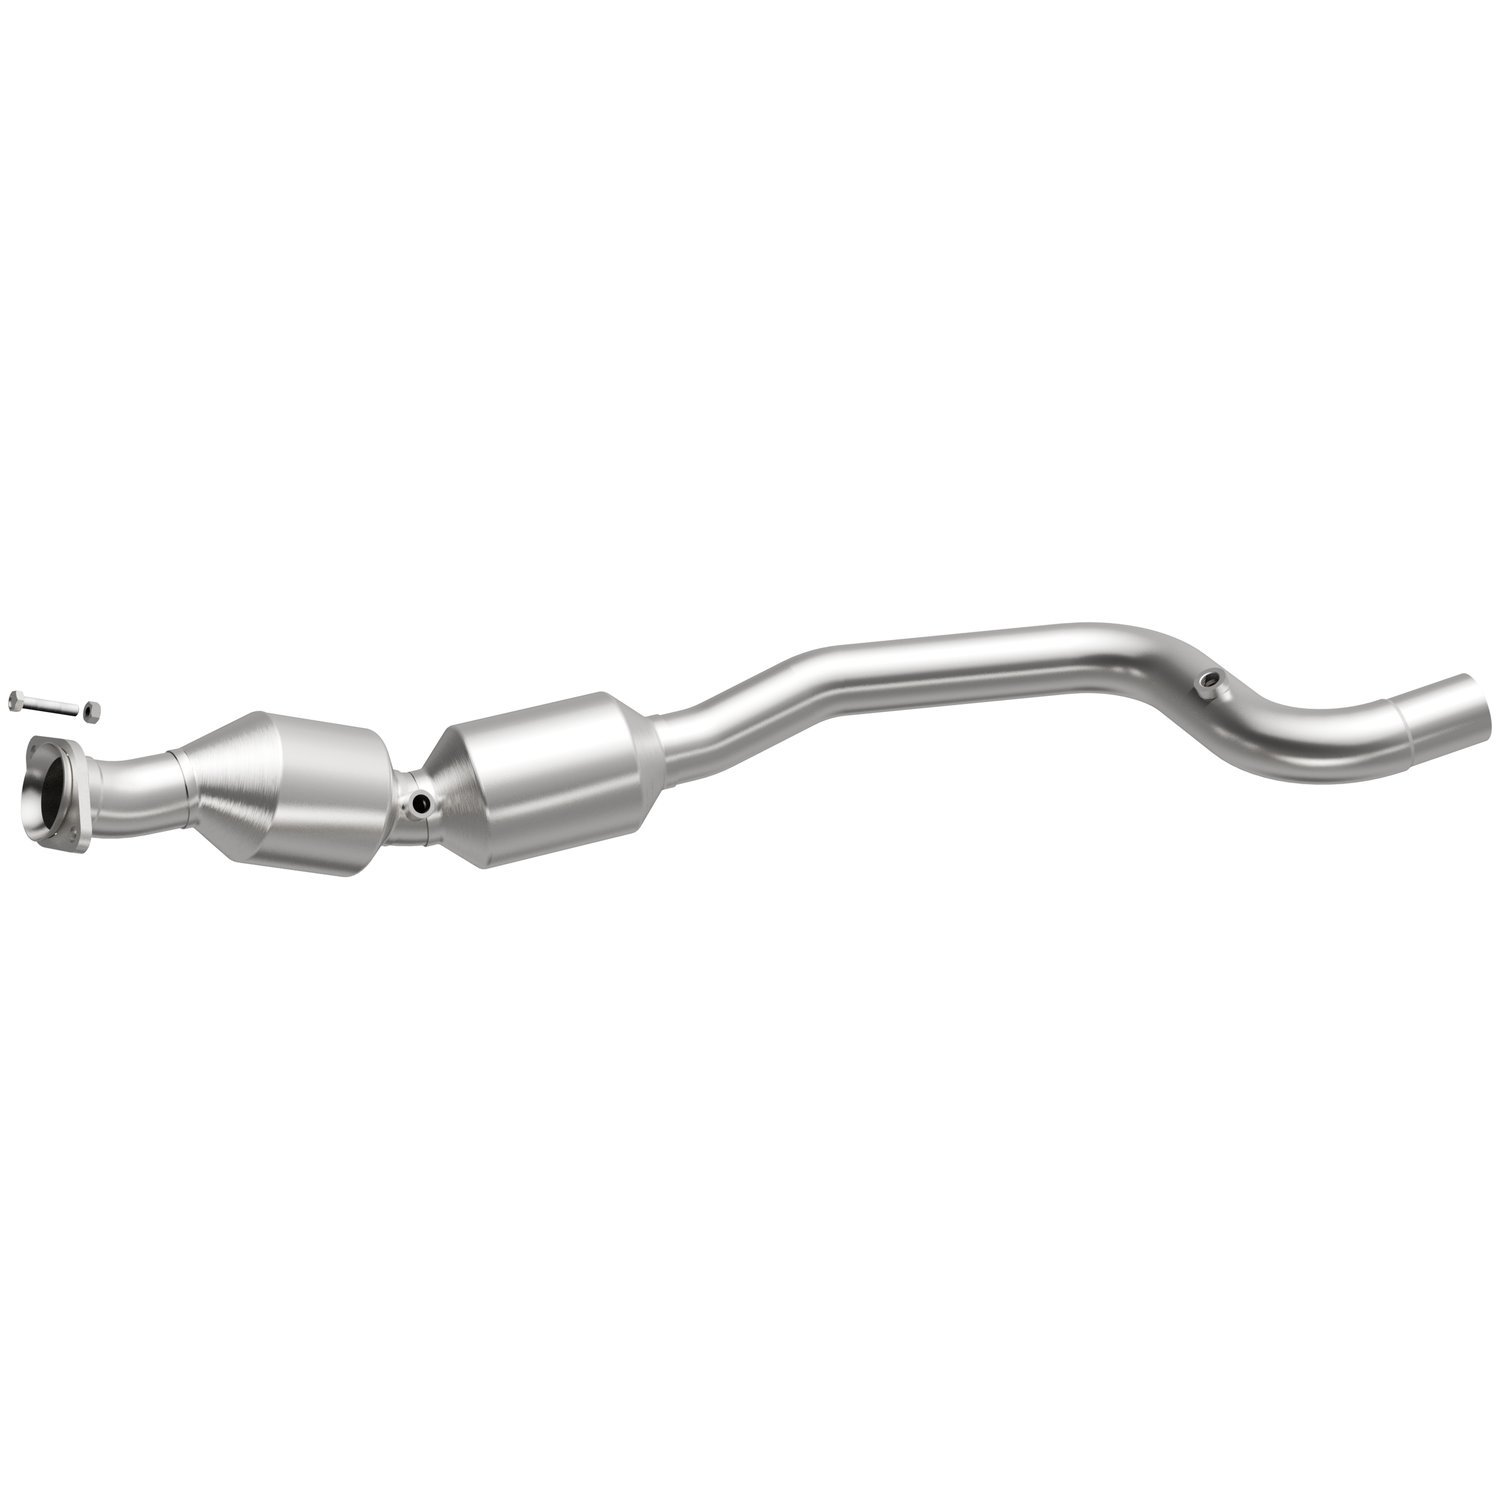 OEM Grade Federal / EPA Compliant Direct-Fit Catalytic Converter 21-536